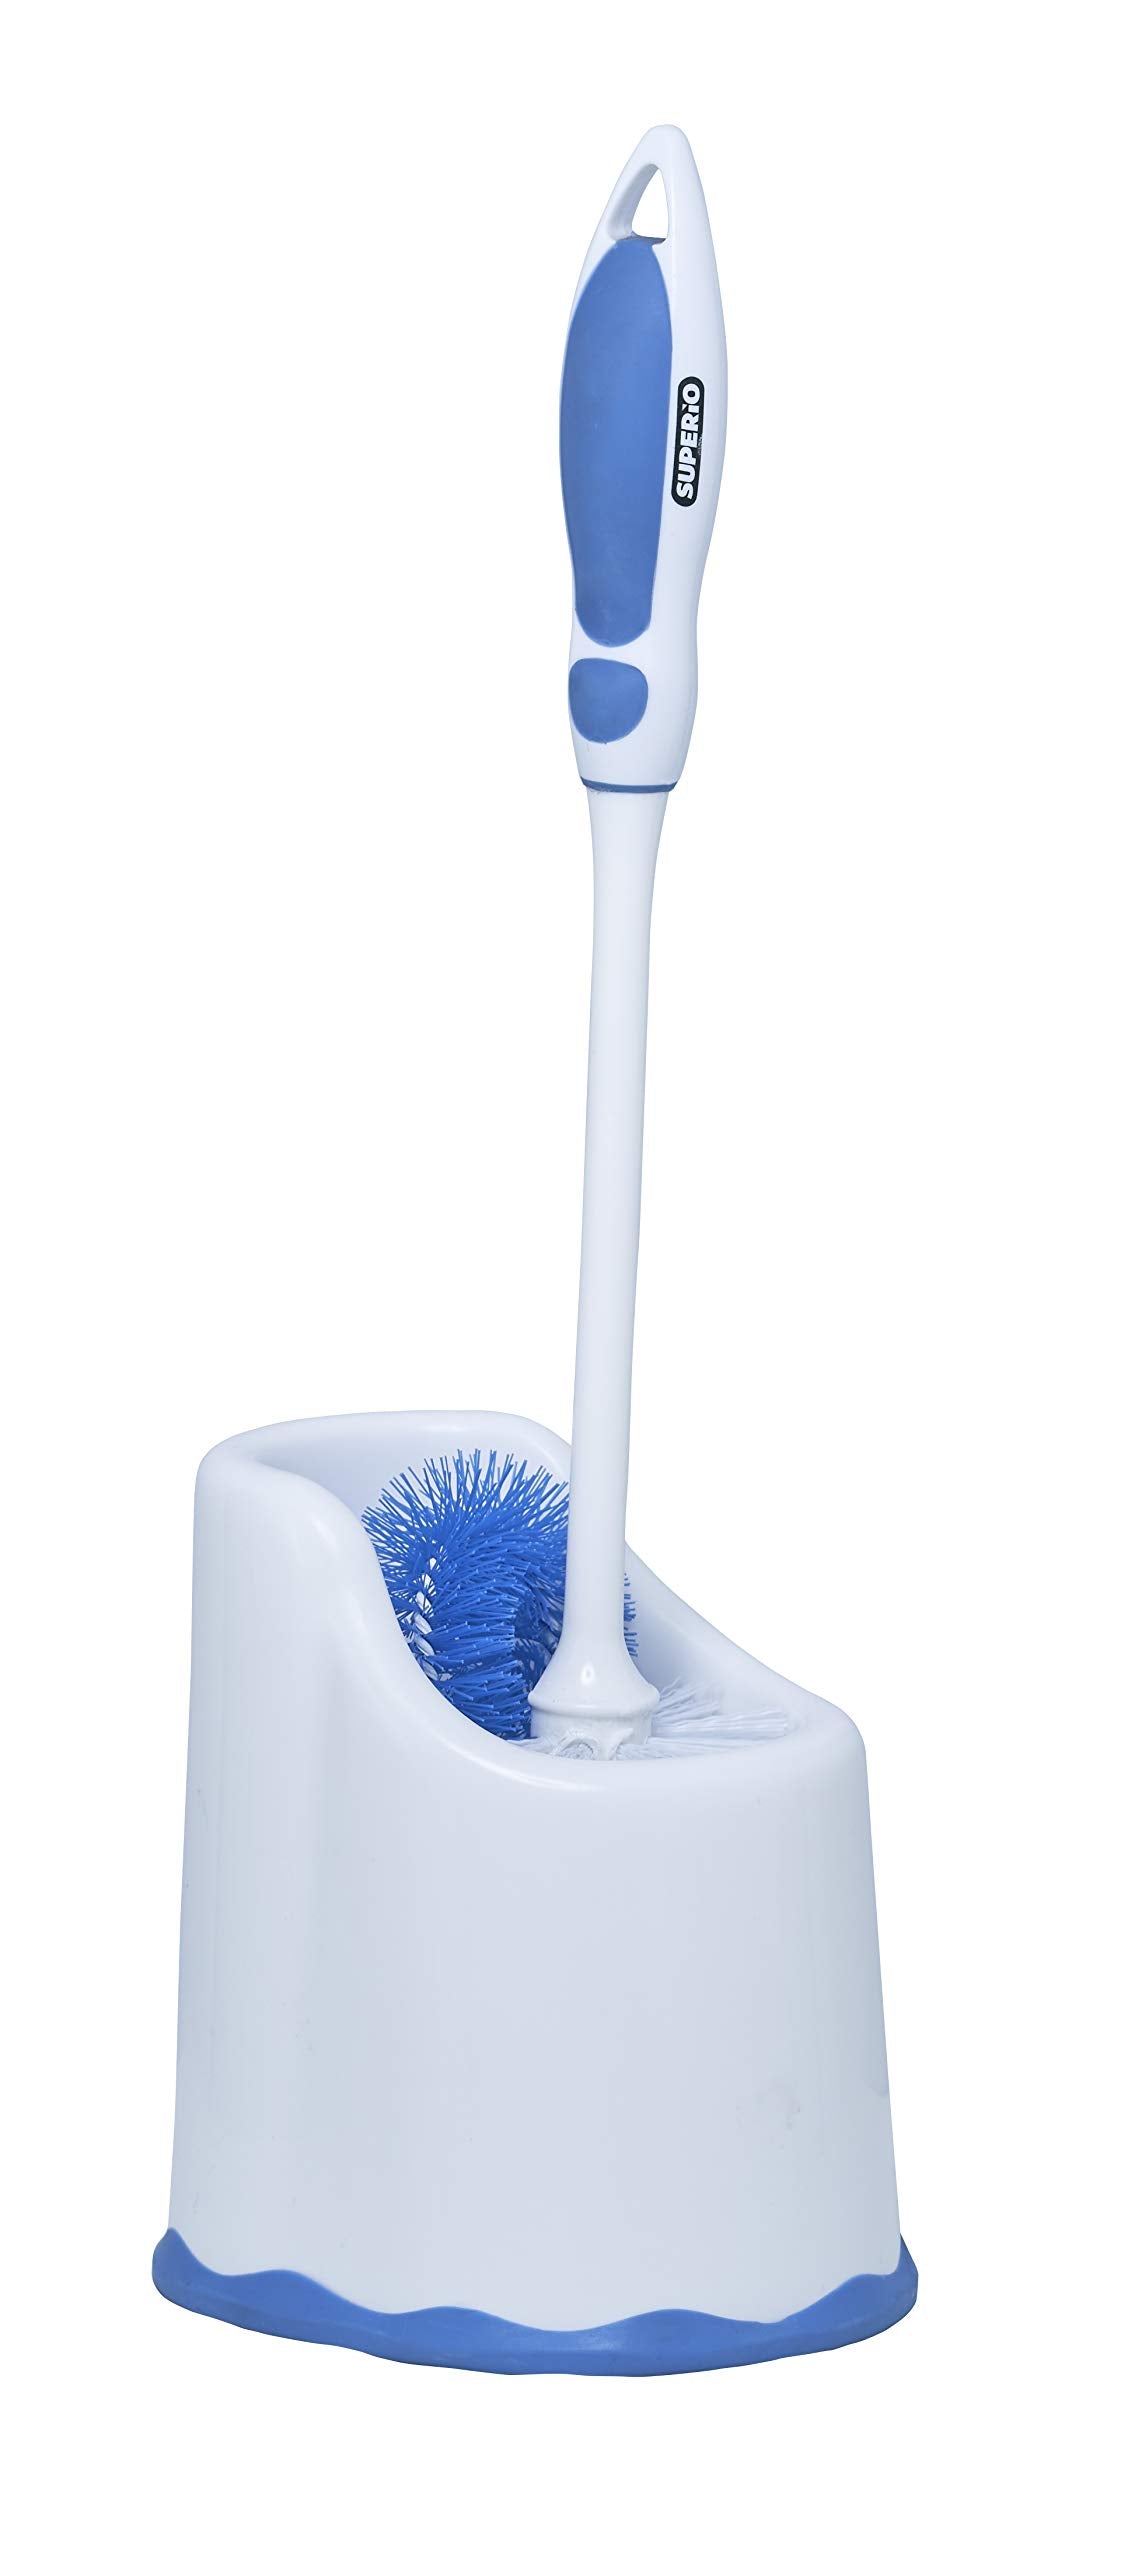 Bathroom Toilet Cleaning Brush With Rim Cleaner And Holder Set